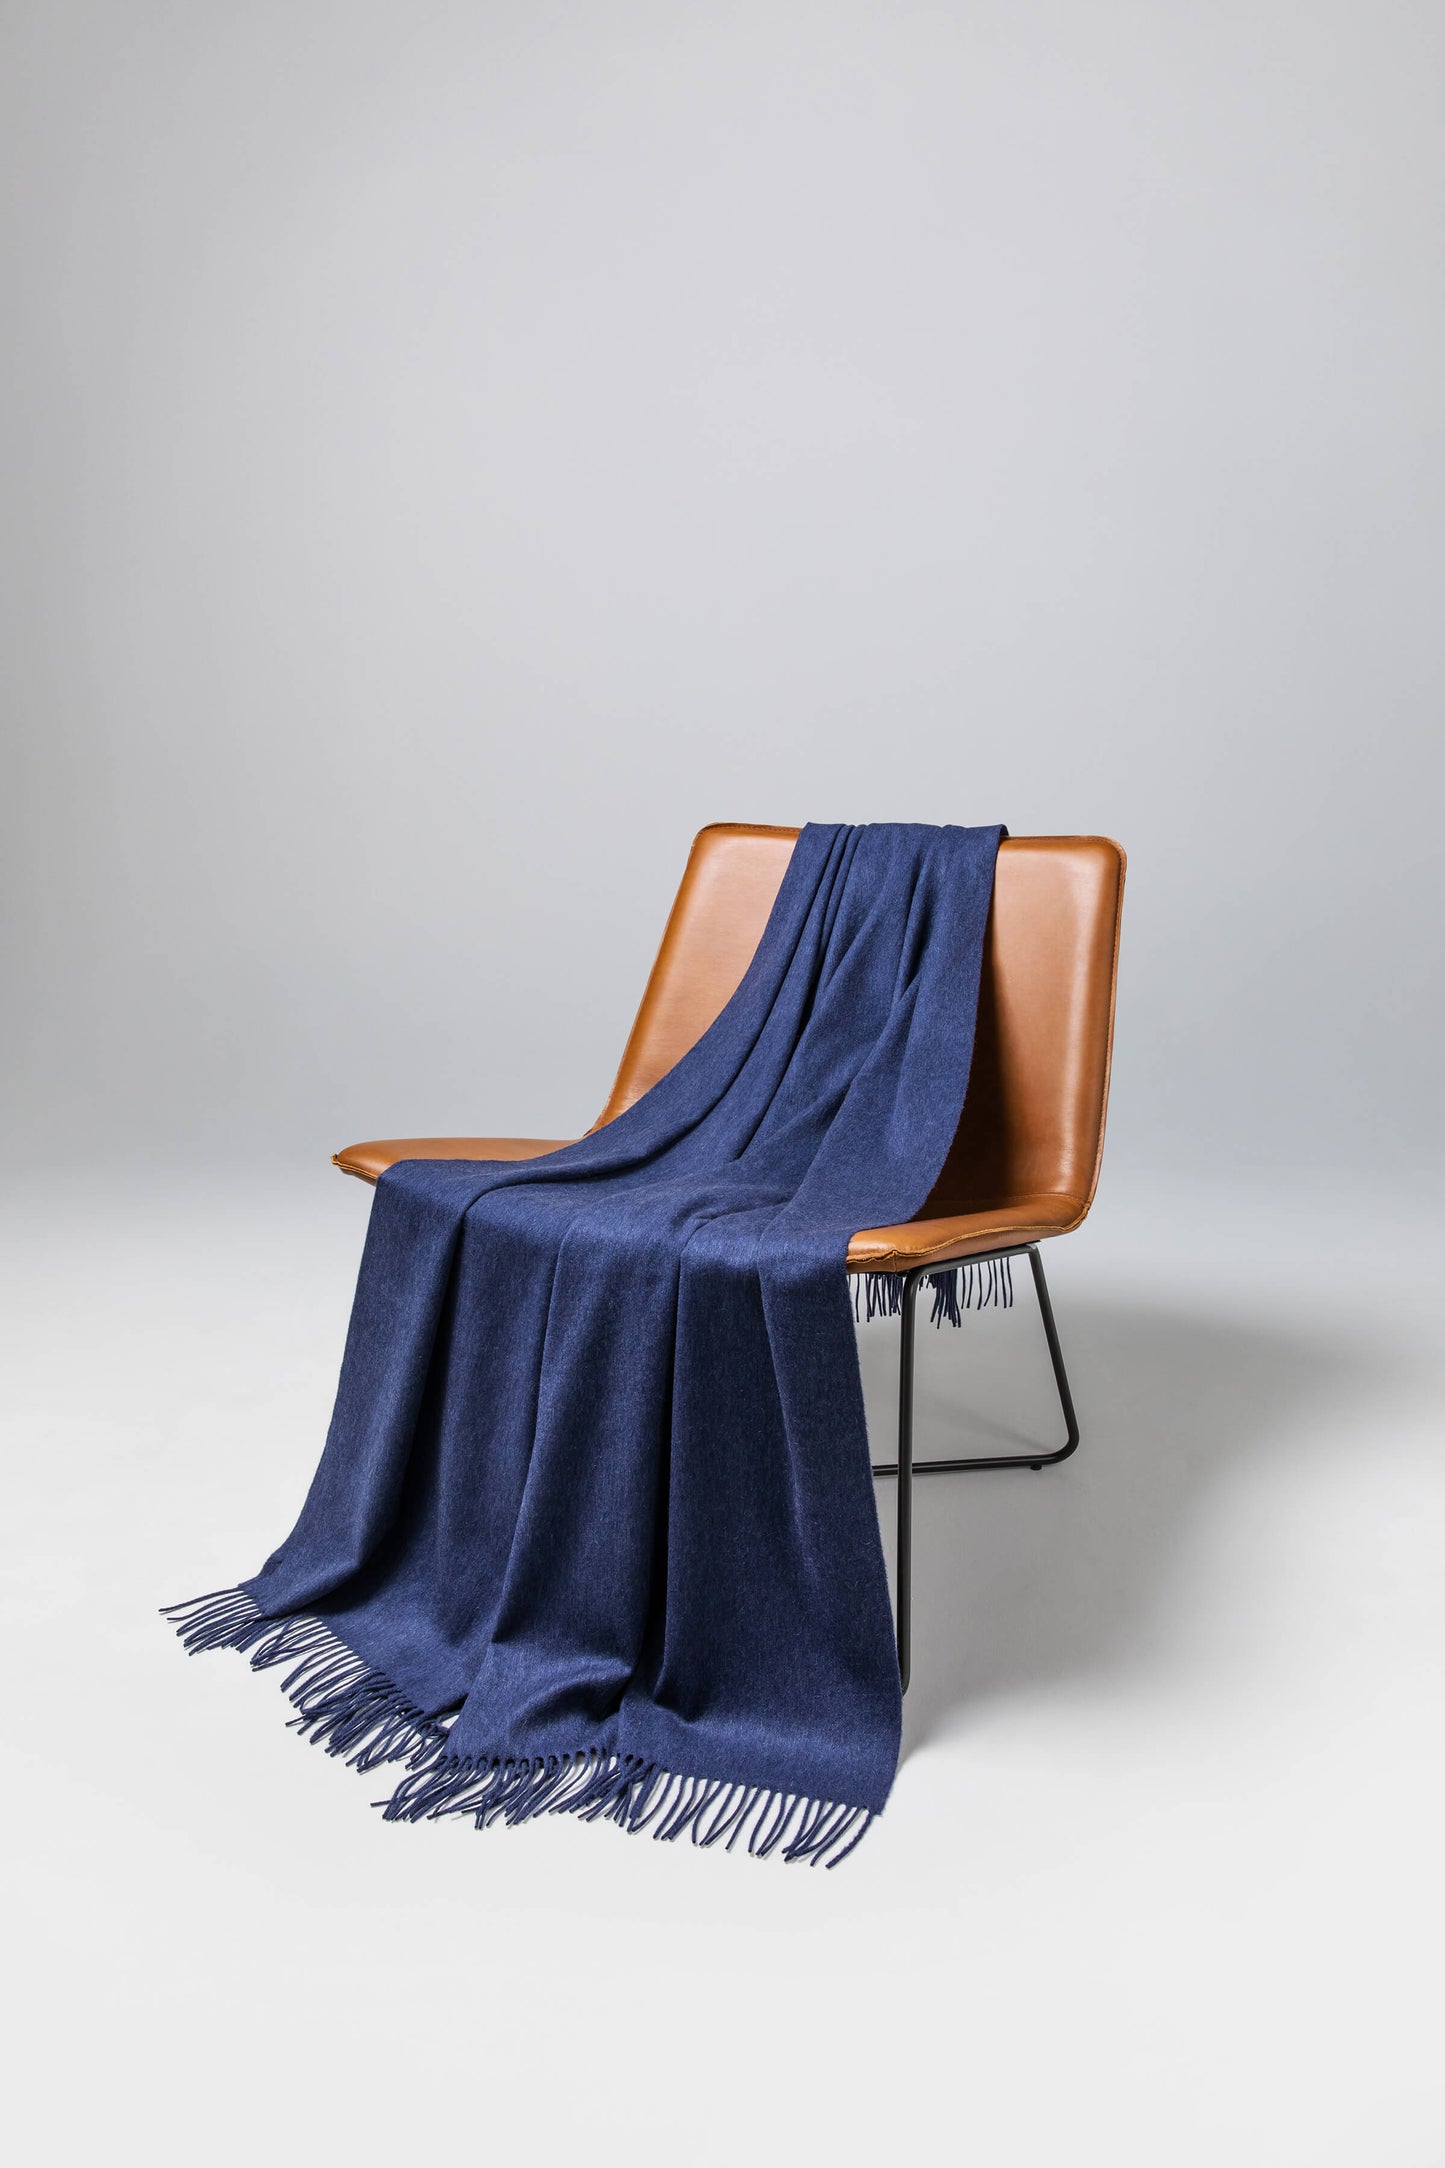 Johnstons of Elgin’s Denim Blue Cashmere Throw on brown chair on a grey background WA000055HD0724